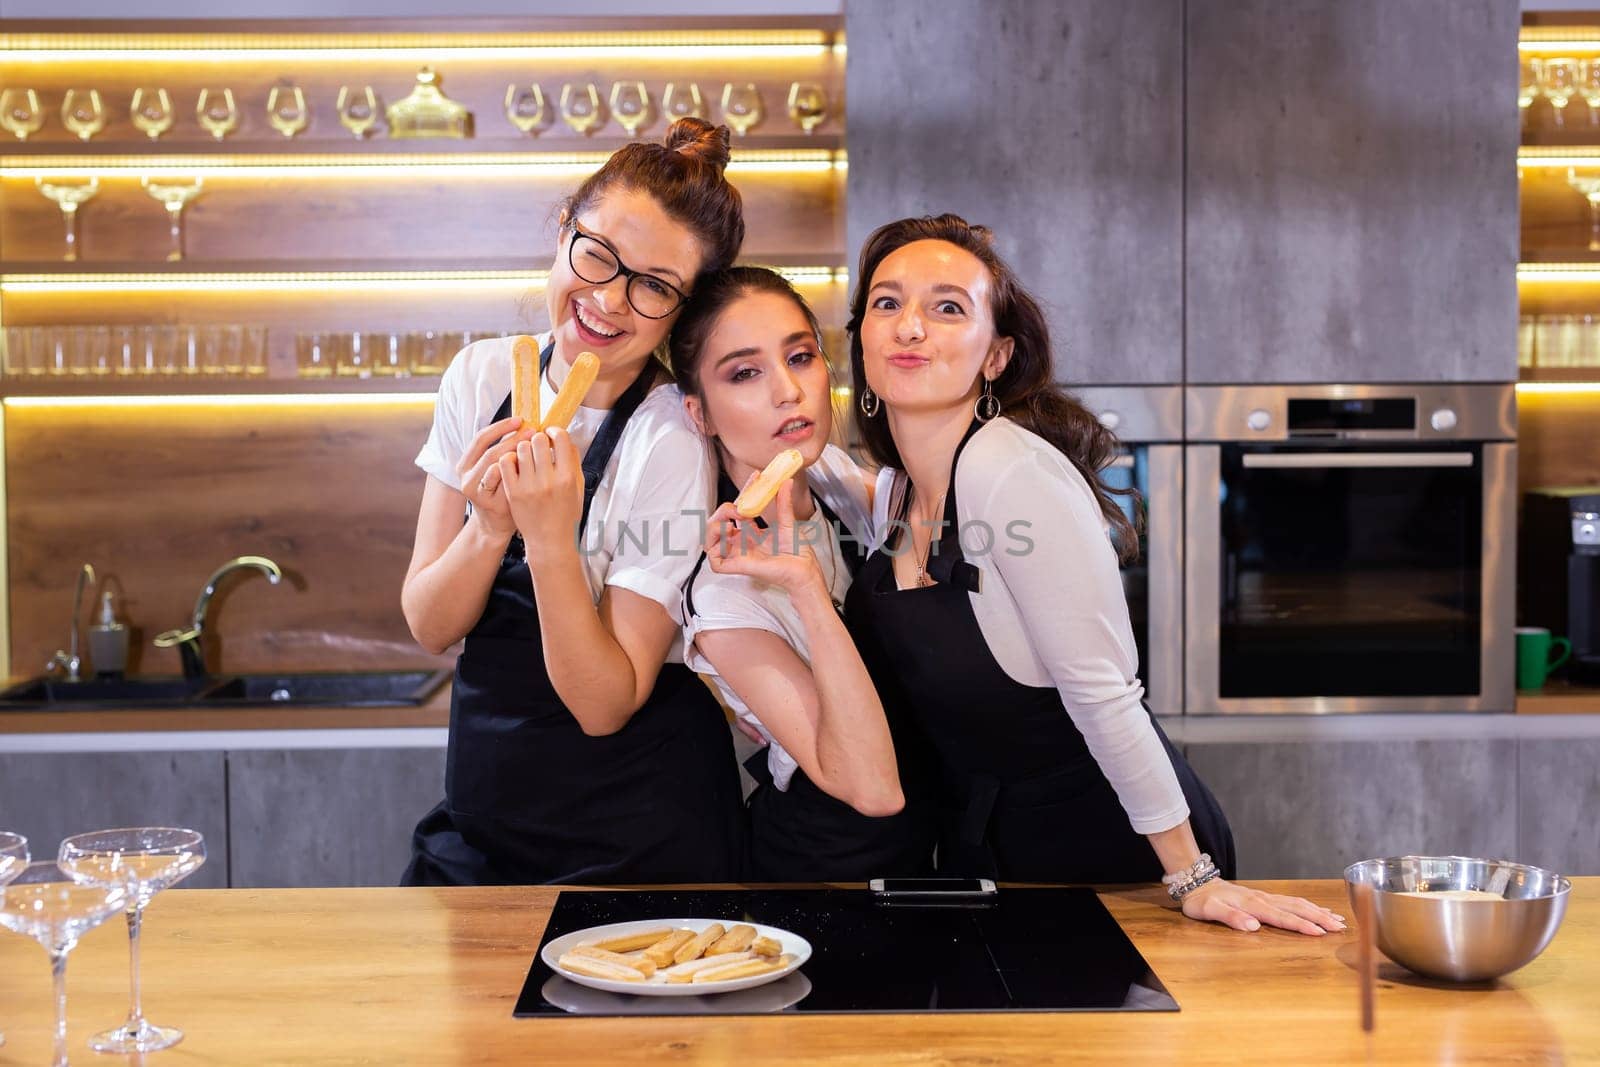 Three funny female chef in uniform holding cookies while smiling and having fun at camera in kitchen